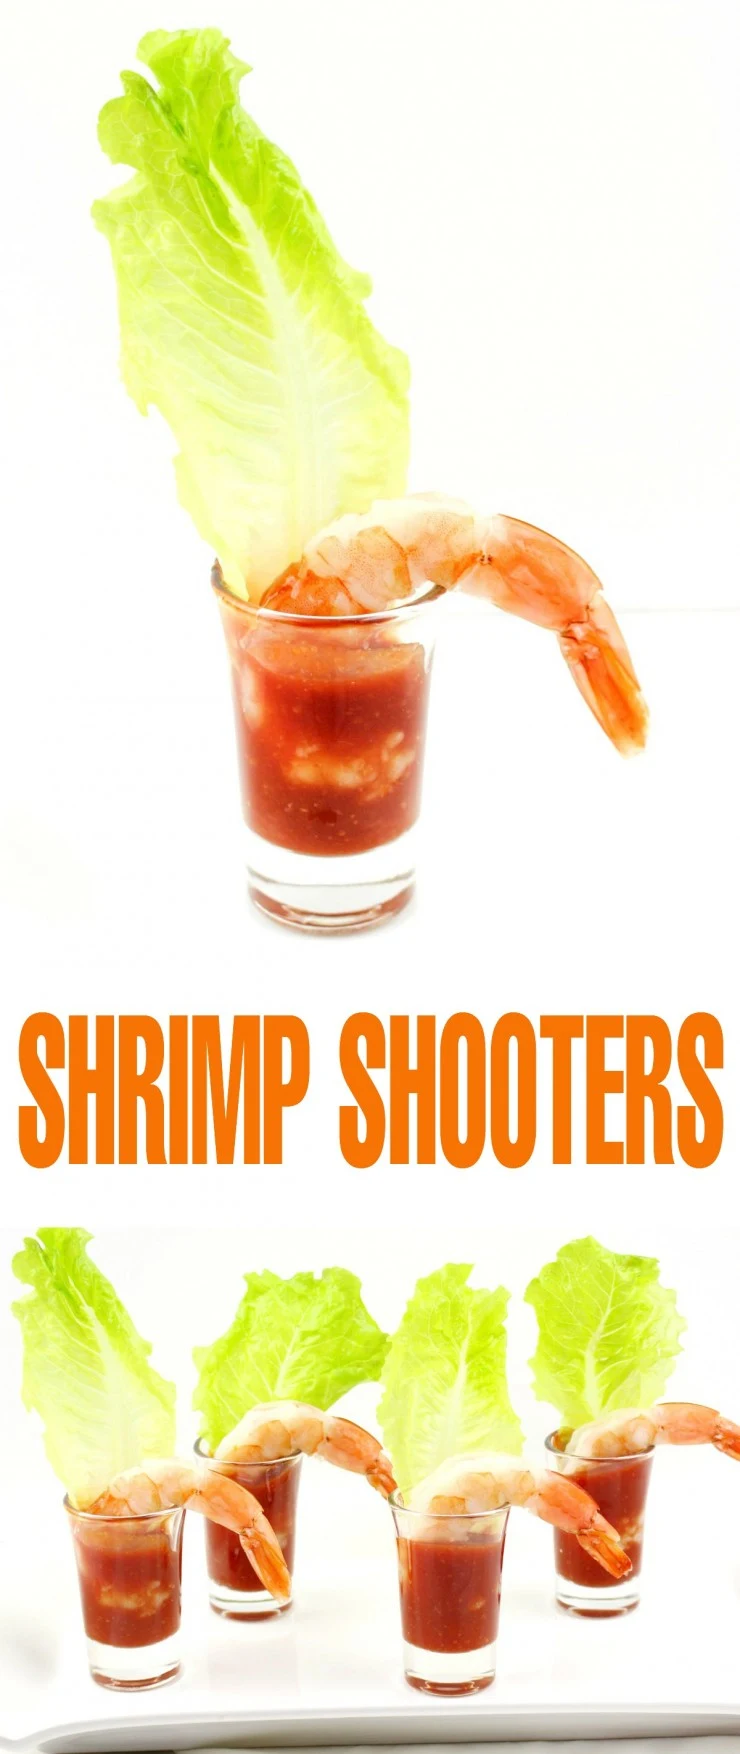  These easy shrimp shooters make for a simple to put together appetizer. Think single serve shrimp cocktails that are as easy to eat as they are to prep.